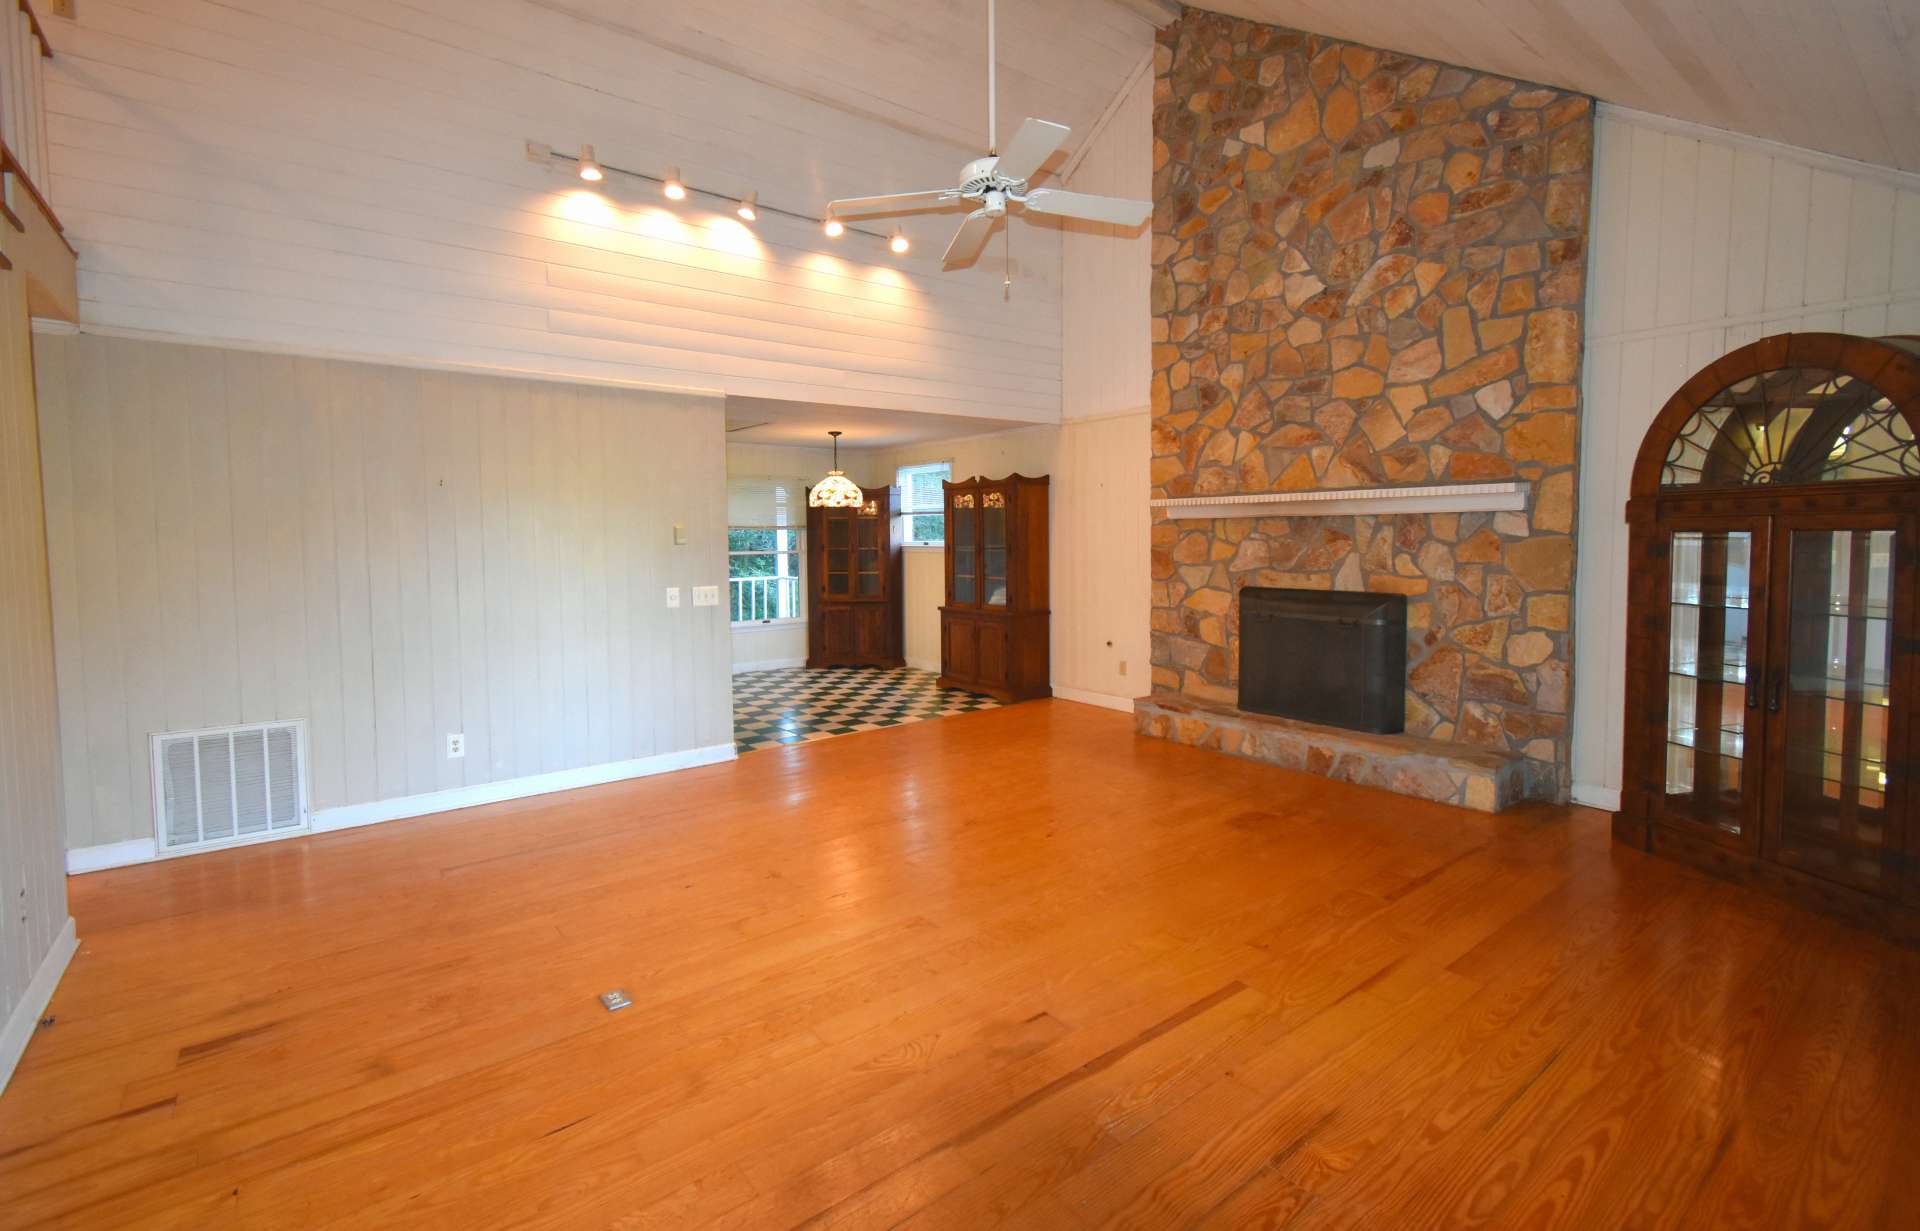 You will love the oven living area with high partially vaulted ceiling, stone wood-burning fireplace and wood floors.